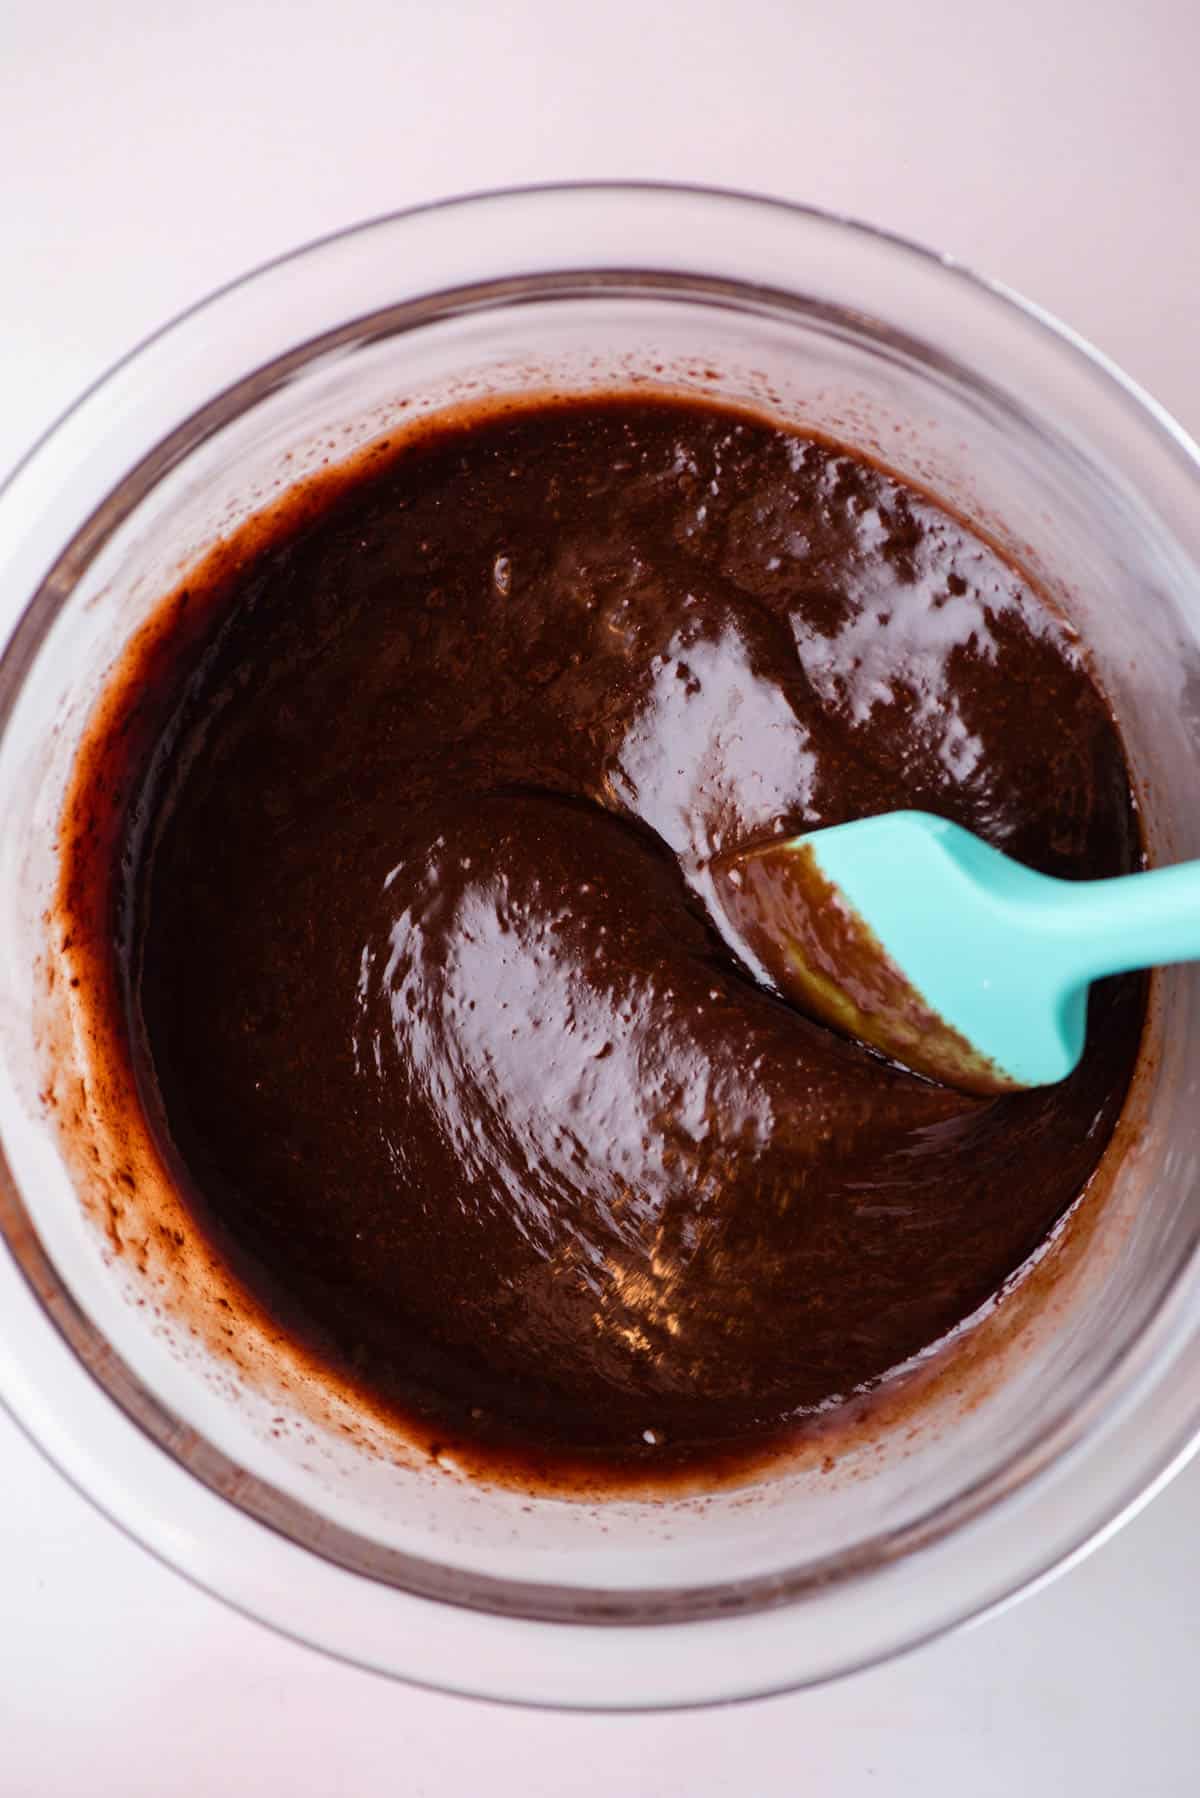 hot fudge sauce in a glass bowl that has been mixed with a teal spatula leaning in the bowl